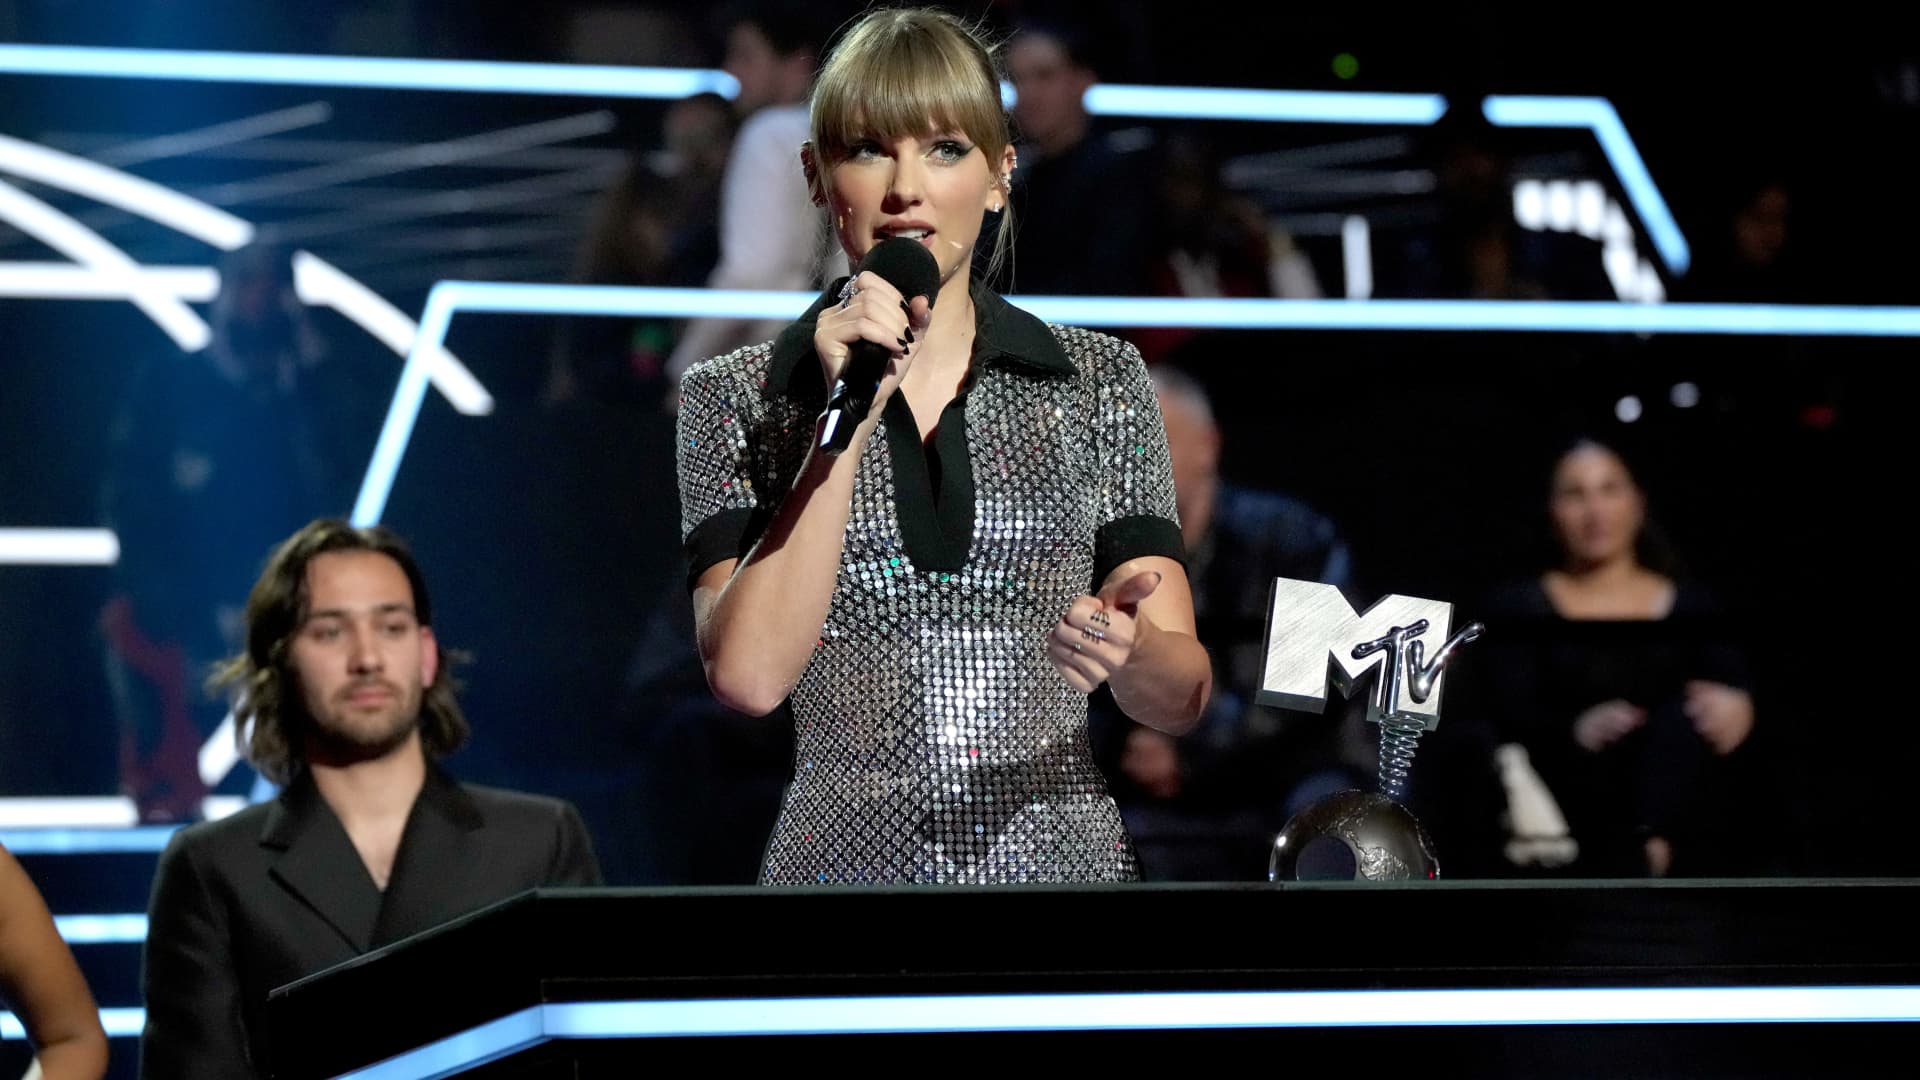 Taylor Swift public ticket sale on Friday is canceled, Ticketmaster says. But th..